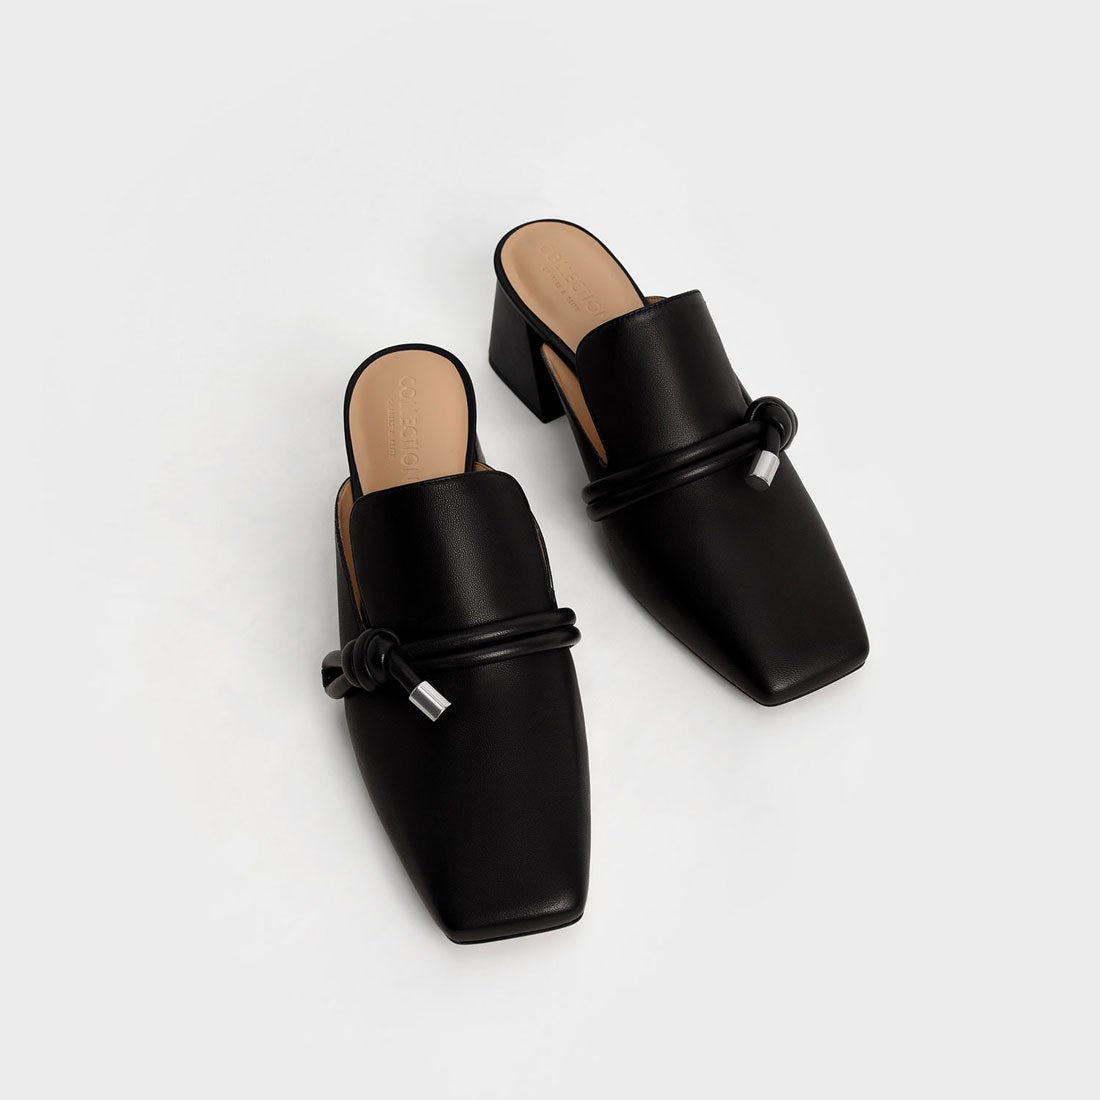 【2022 SPRING 新作】レザーノッティド ローファーミュール / Leather Knotted Loafer Mules （Black）